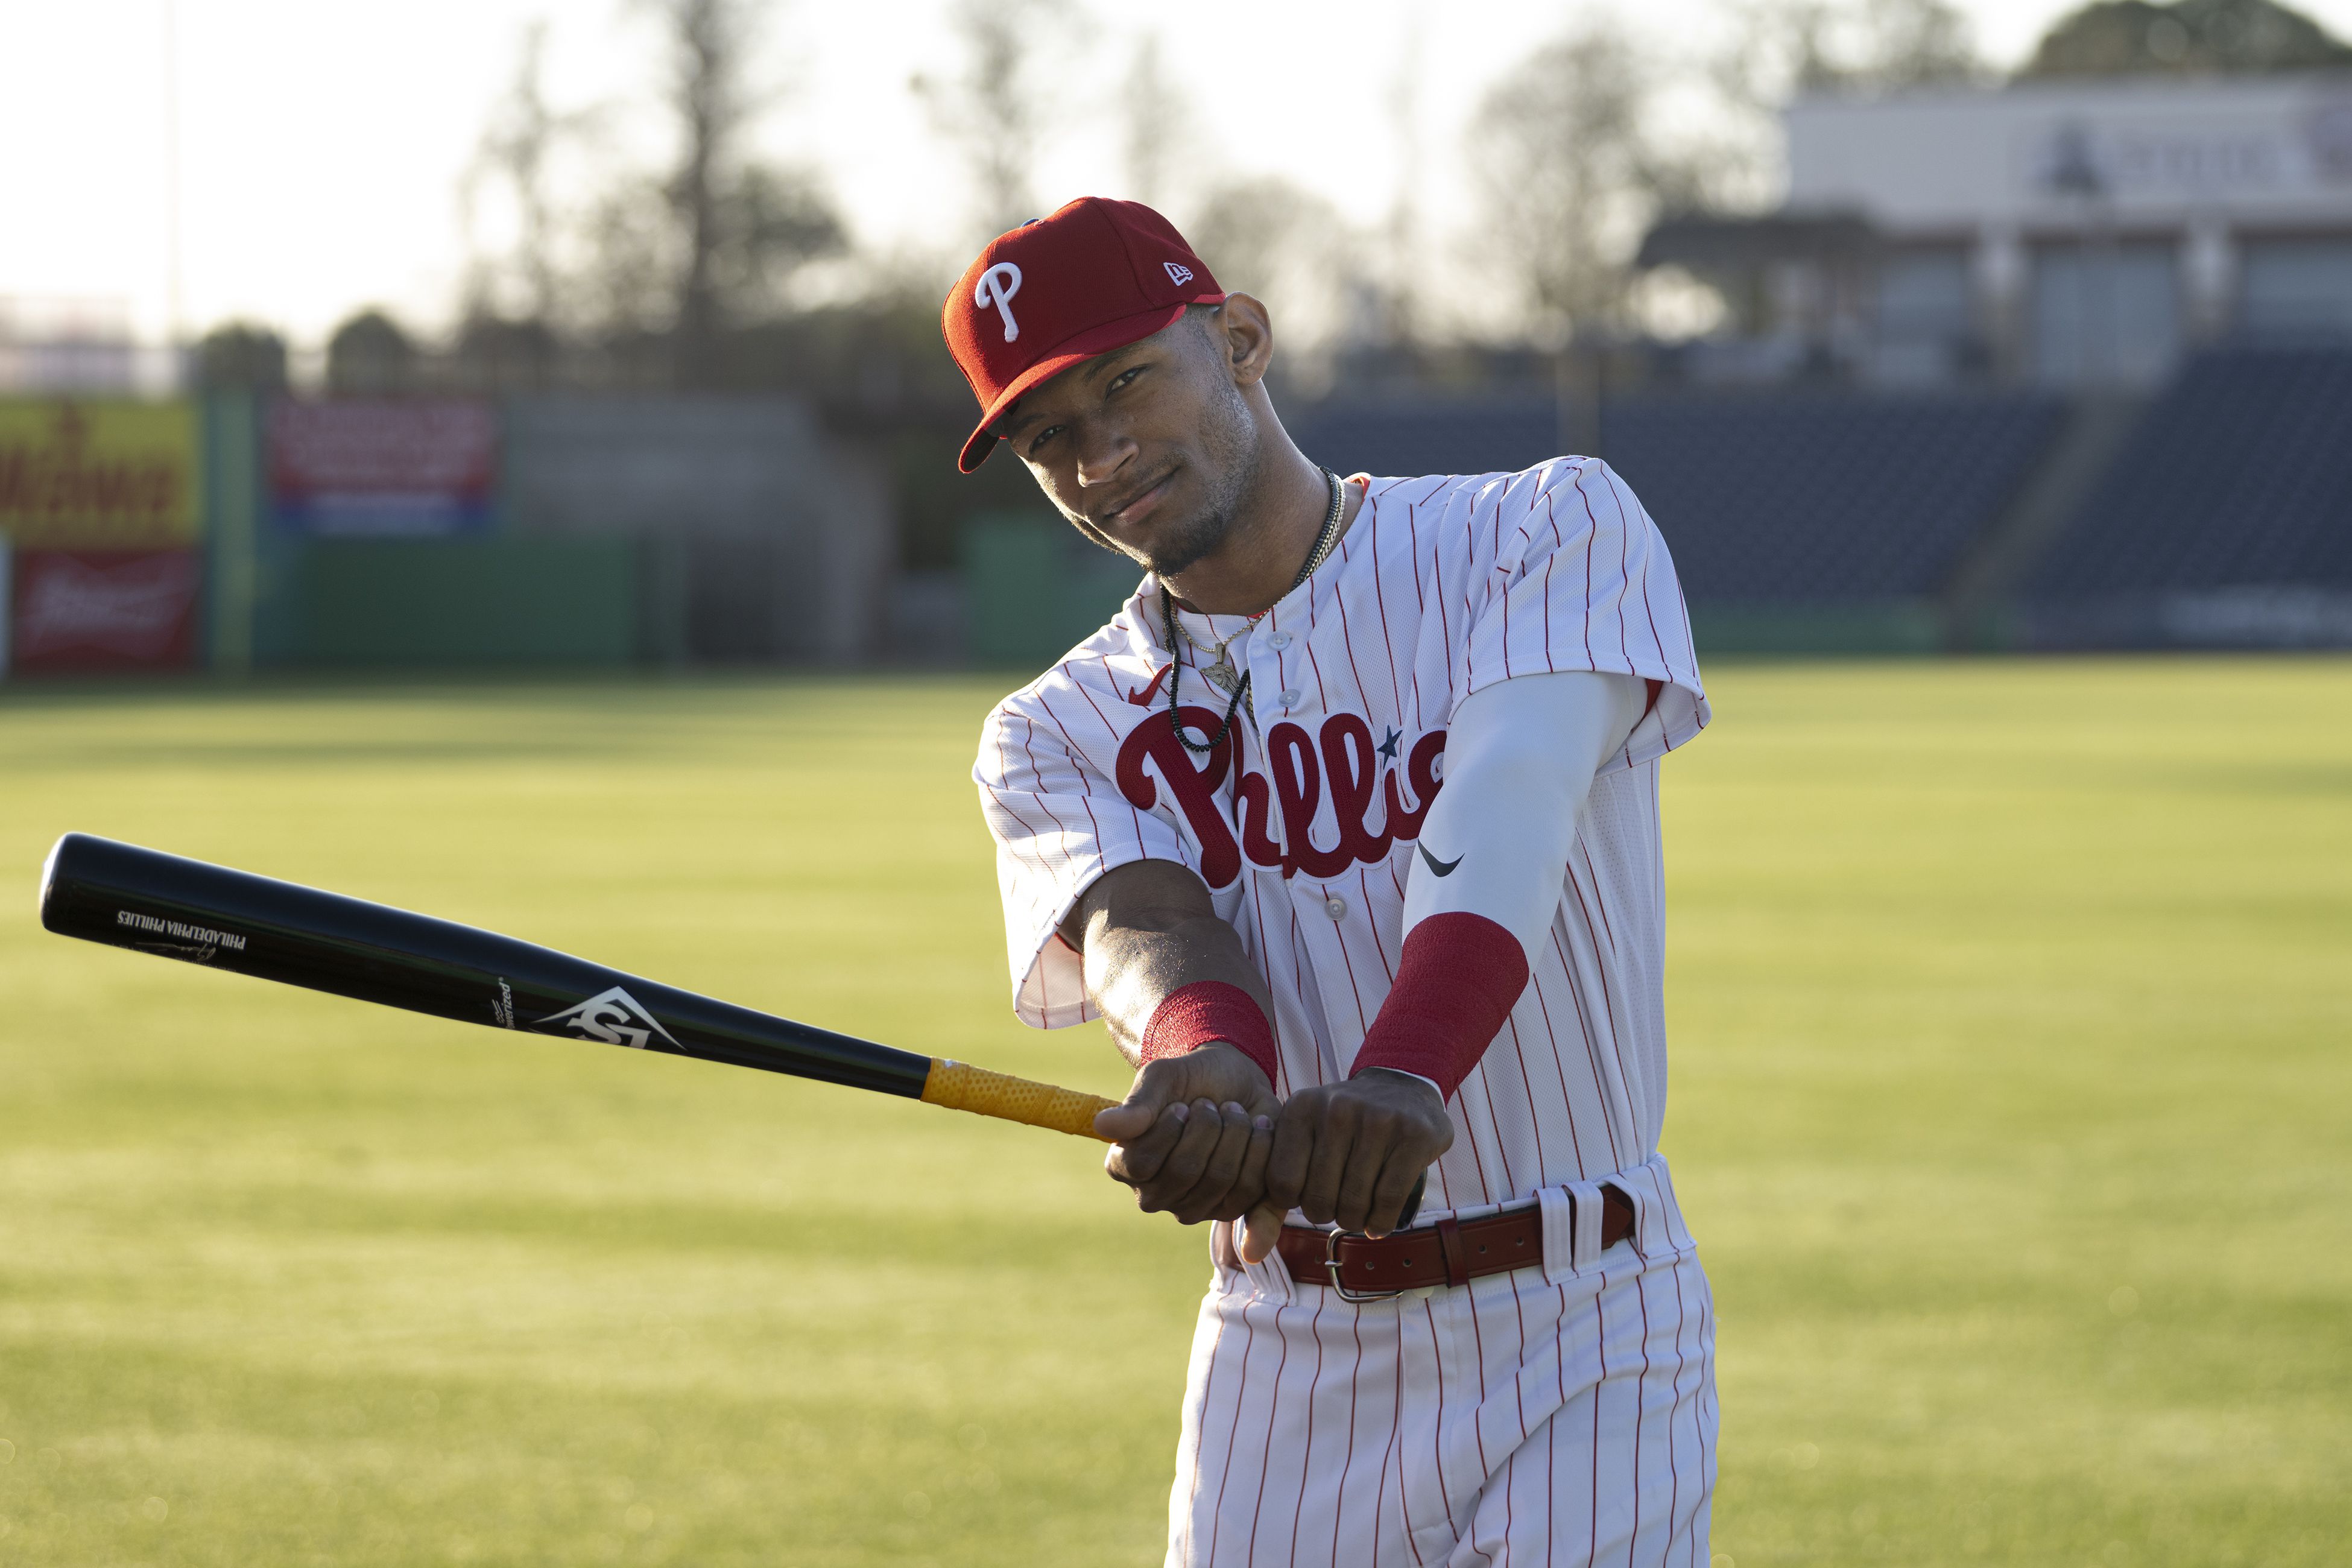 Center fielder Johan Rojas bringing a youthful energy to the